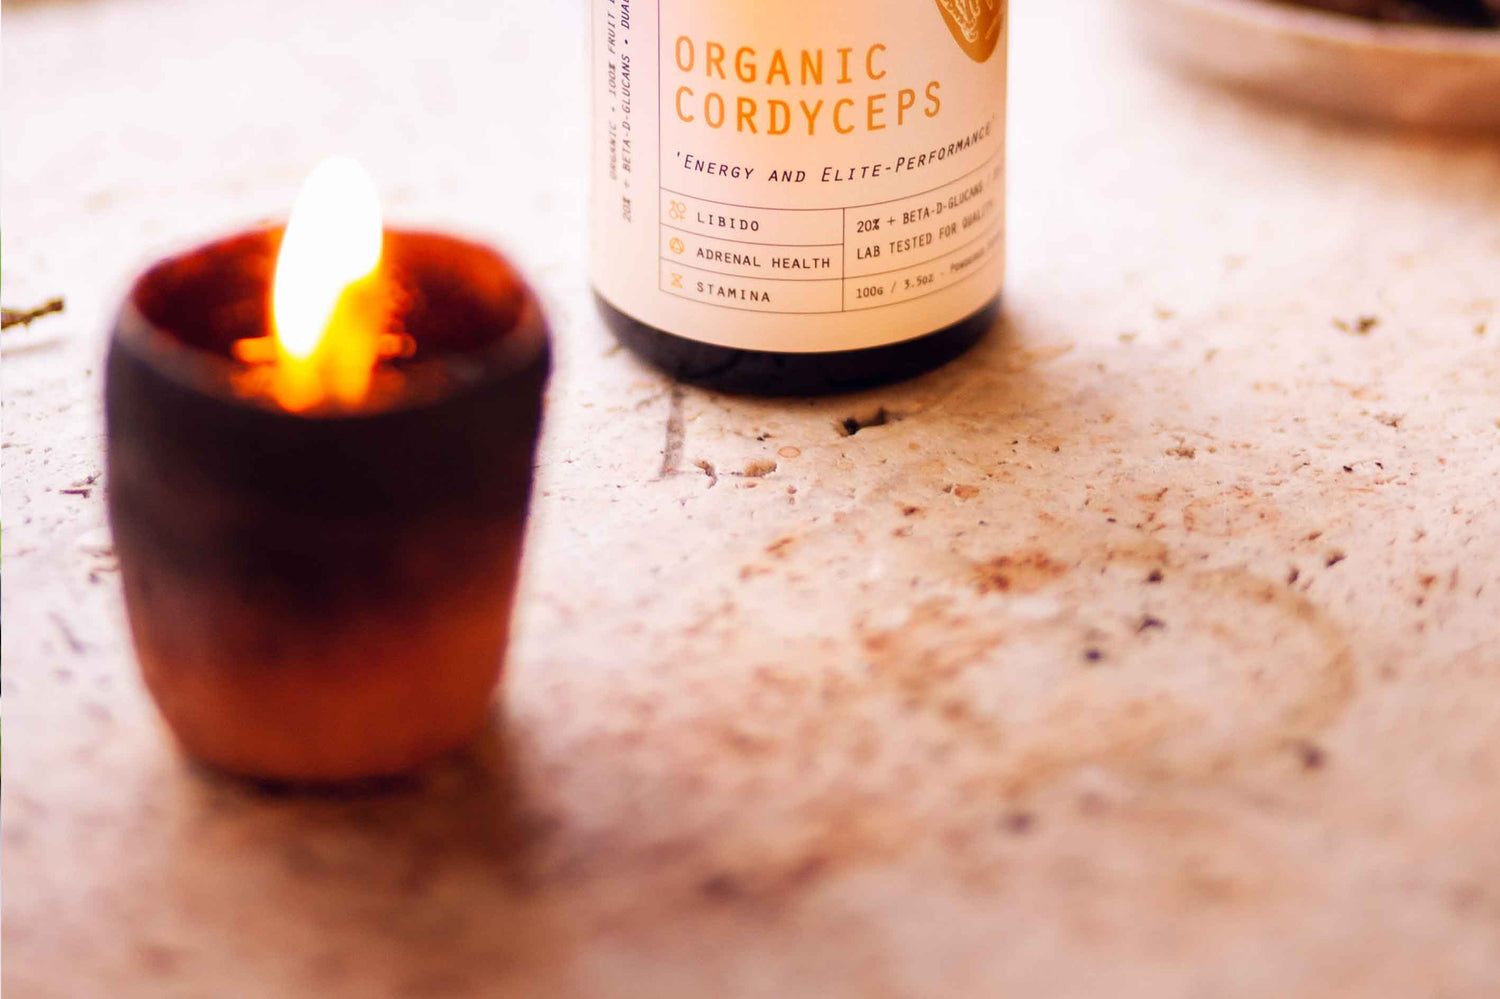 A lit candle on a table next to a jar of Evolution Botanicals Organic Cordyceps